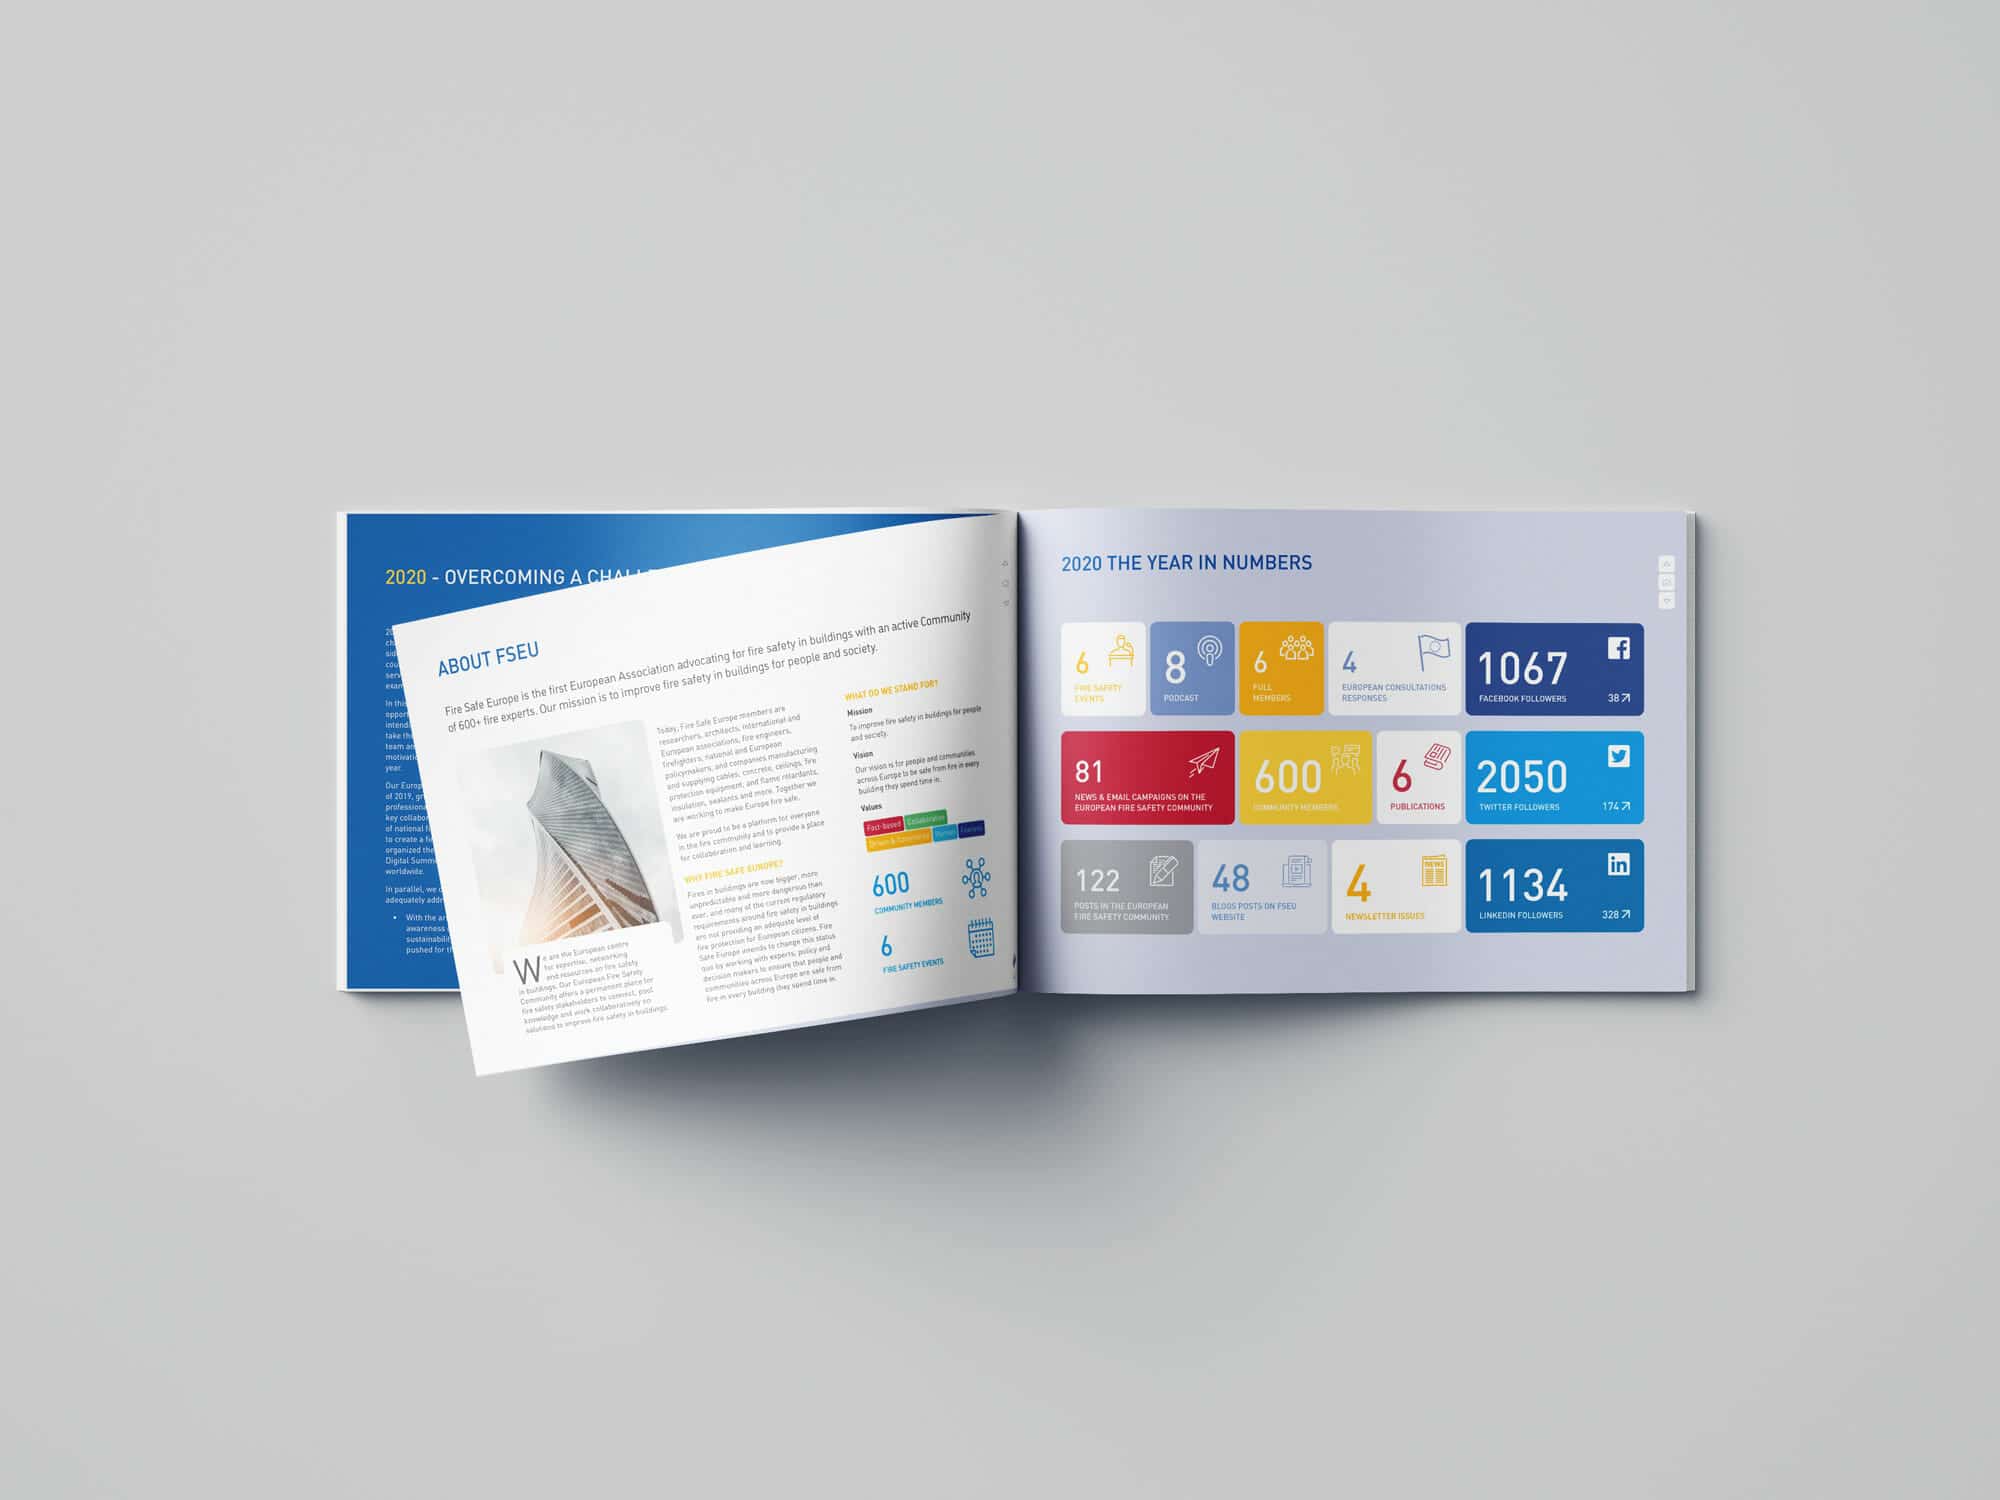 Fire safe europe annual report page simpl-Simpl. SRL is a graphic design studio in Brussels